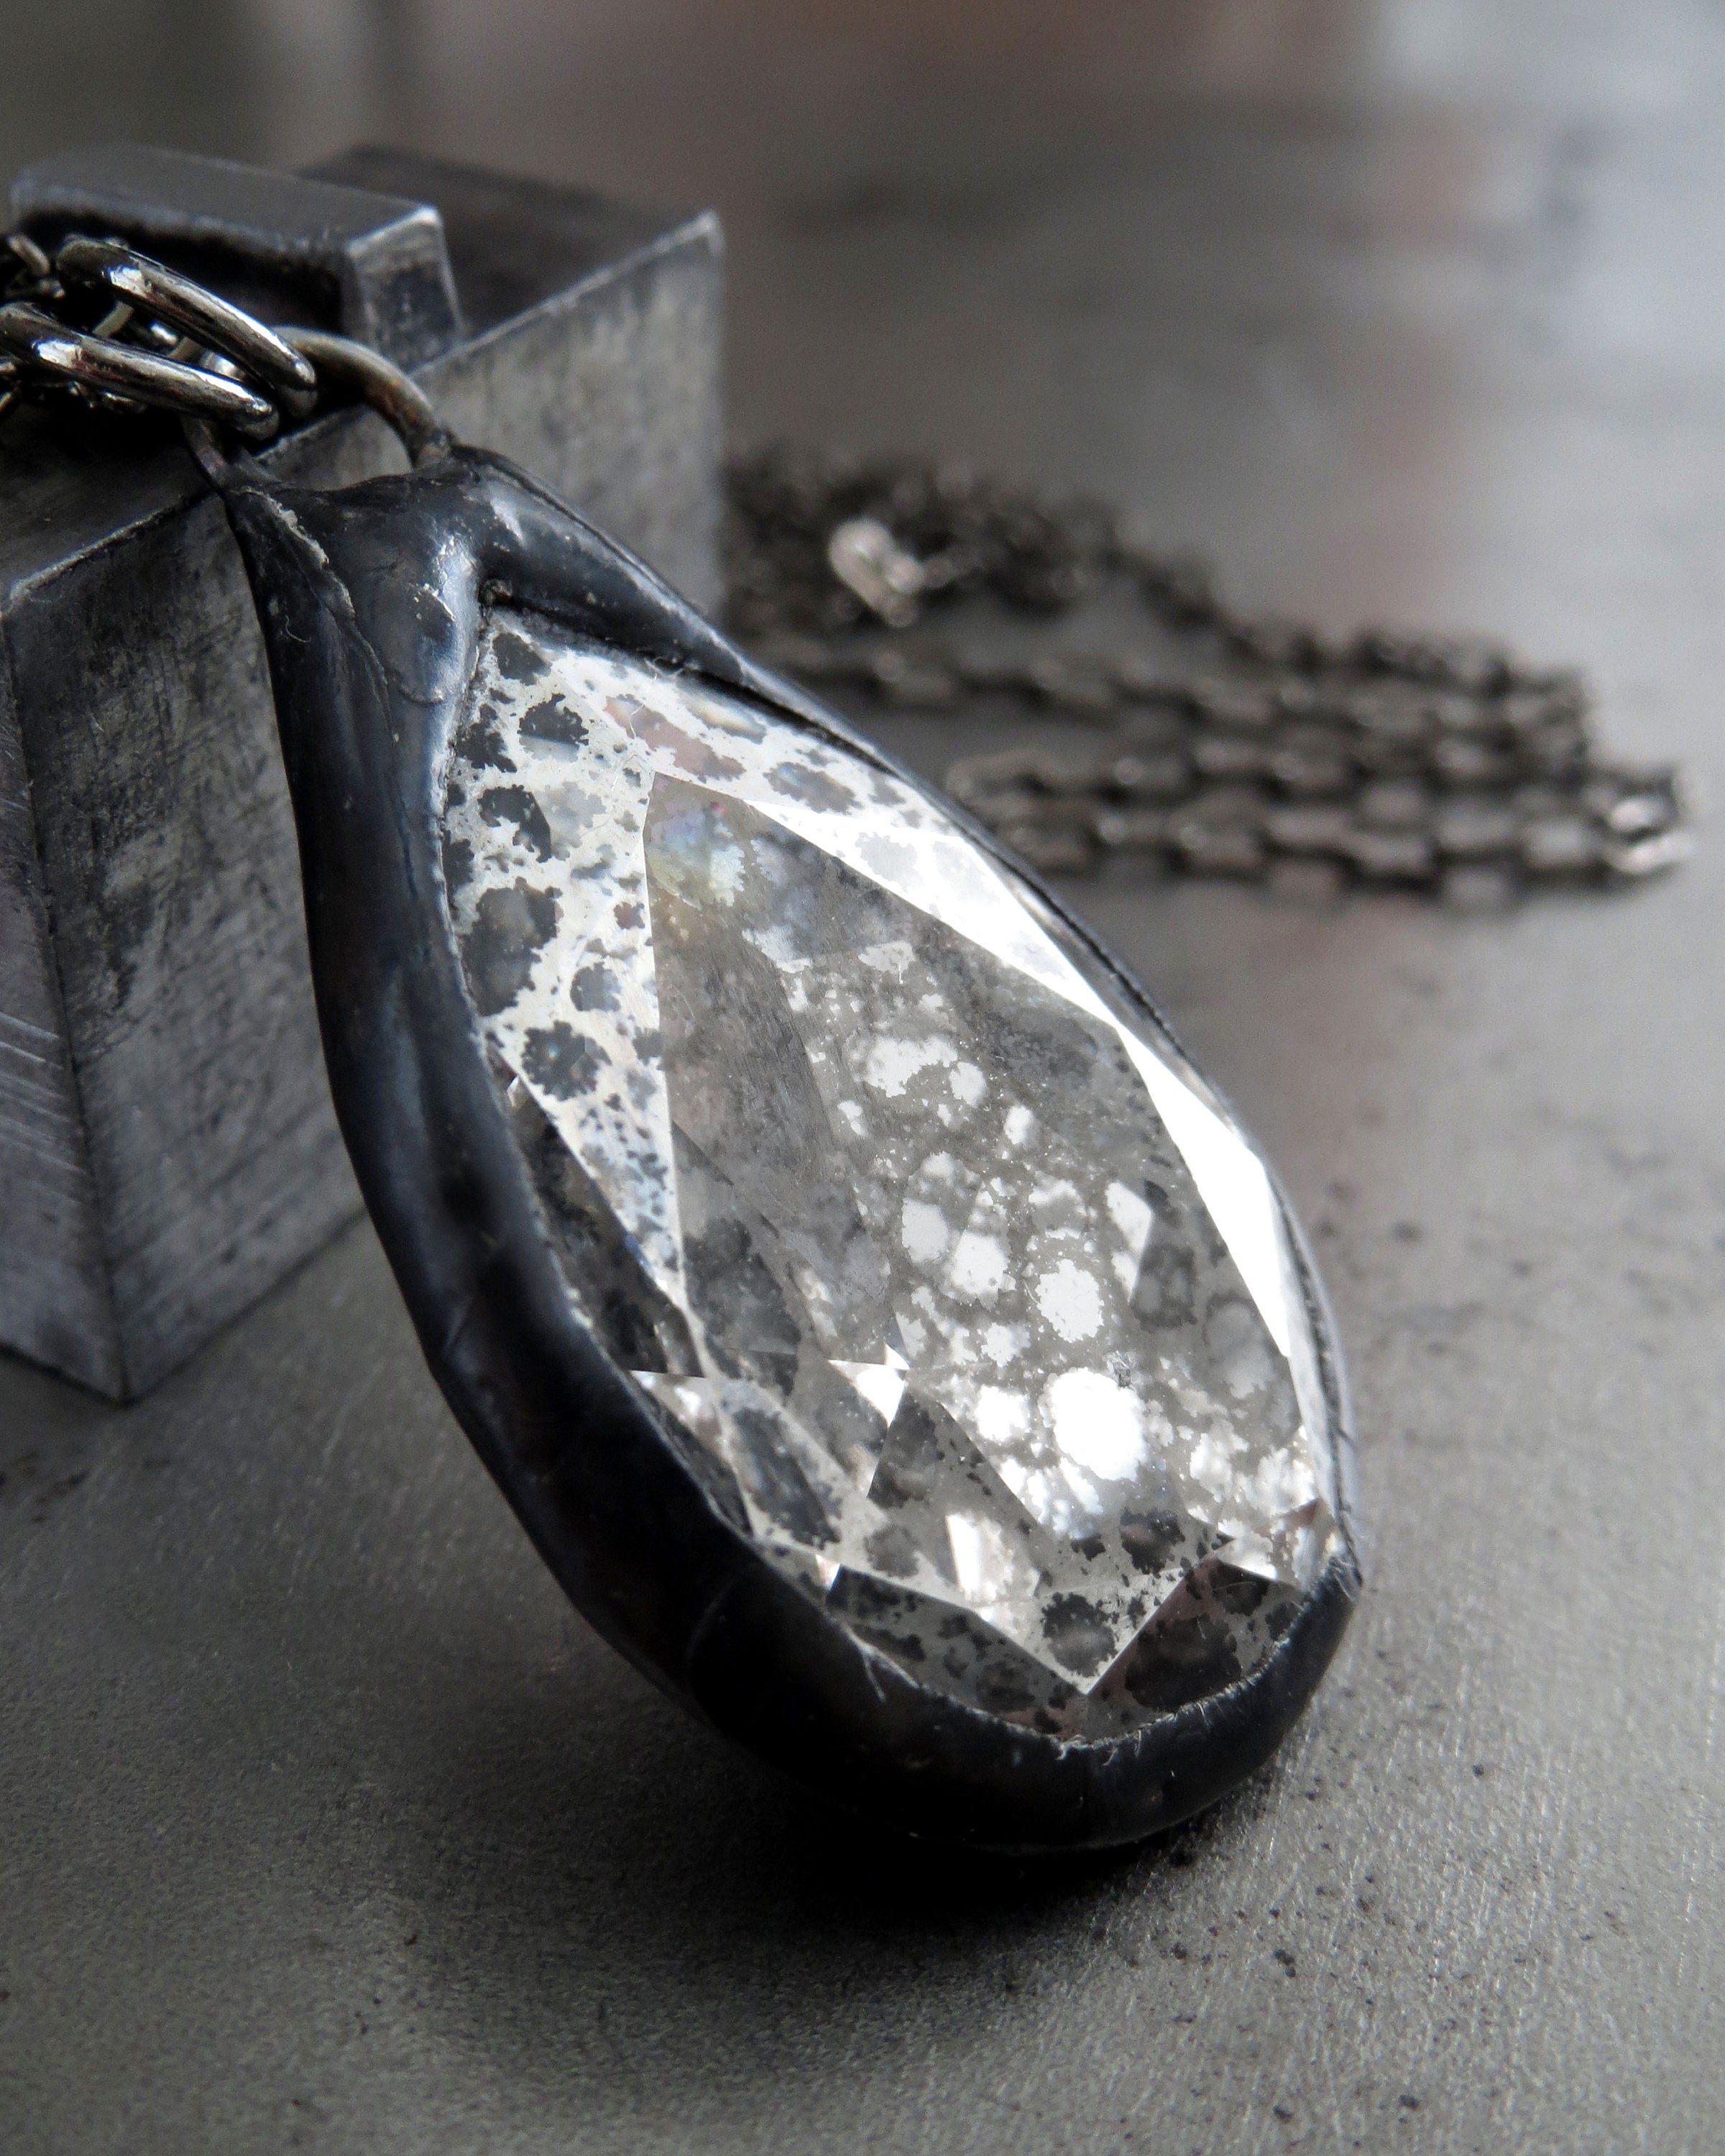 MERCURY - Silver Patina Crystal Teardrop Pendant Necklace, Black Gunmetal Chain, Gothic Silver Crystal Necklace, Gothic Halloween Jewerly